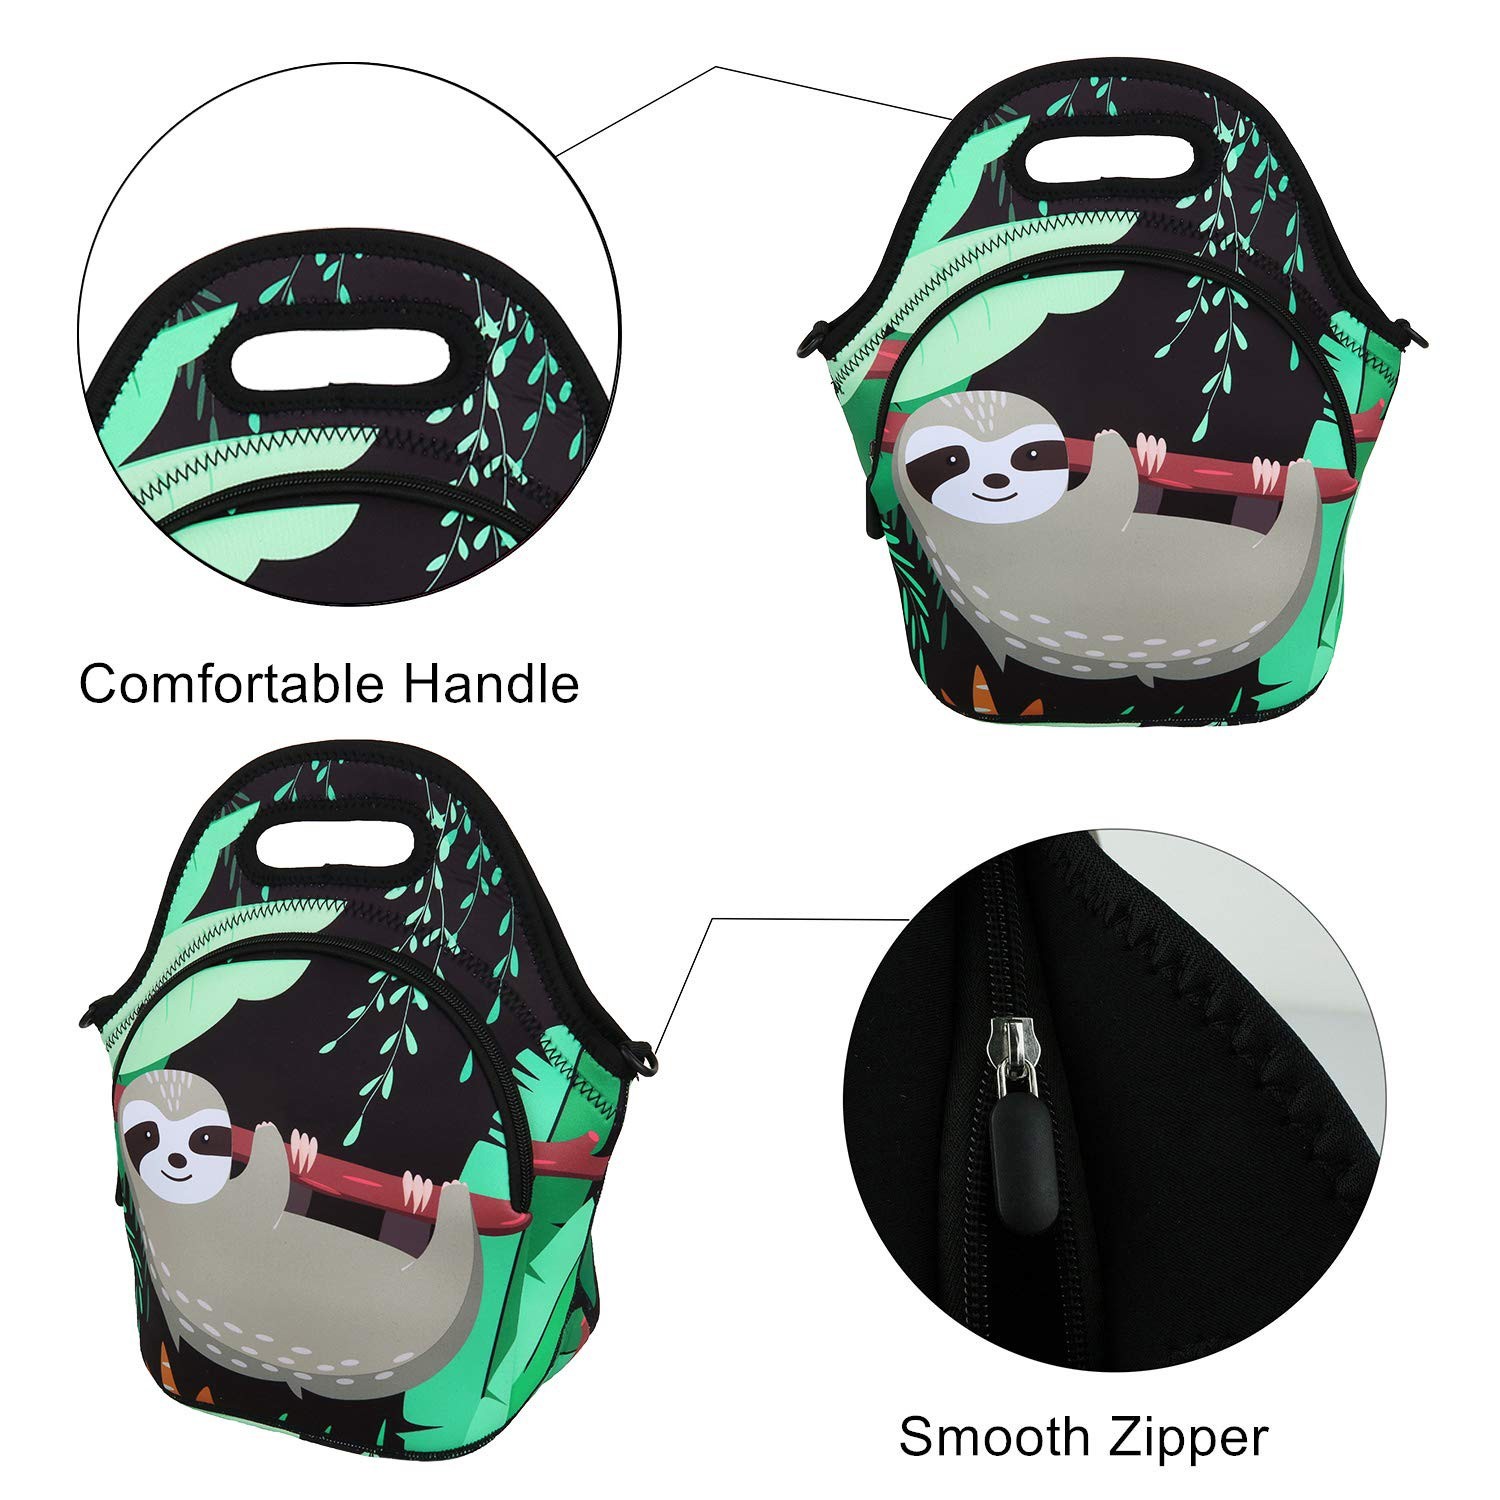 cooler best neoprene bag with accessories pocket for hiking